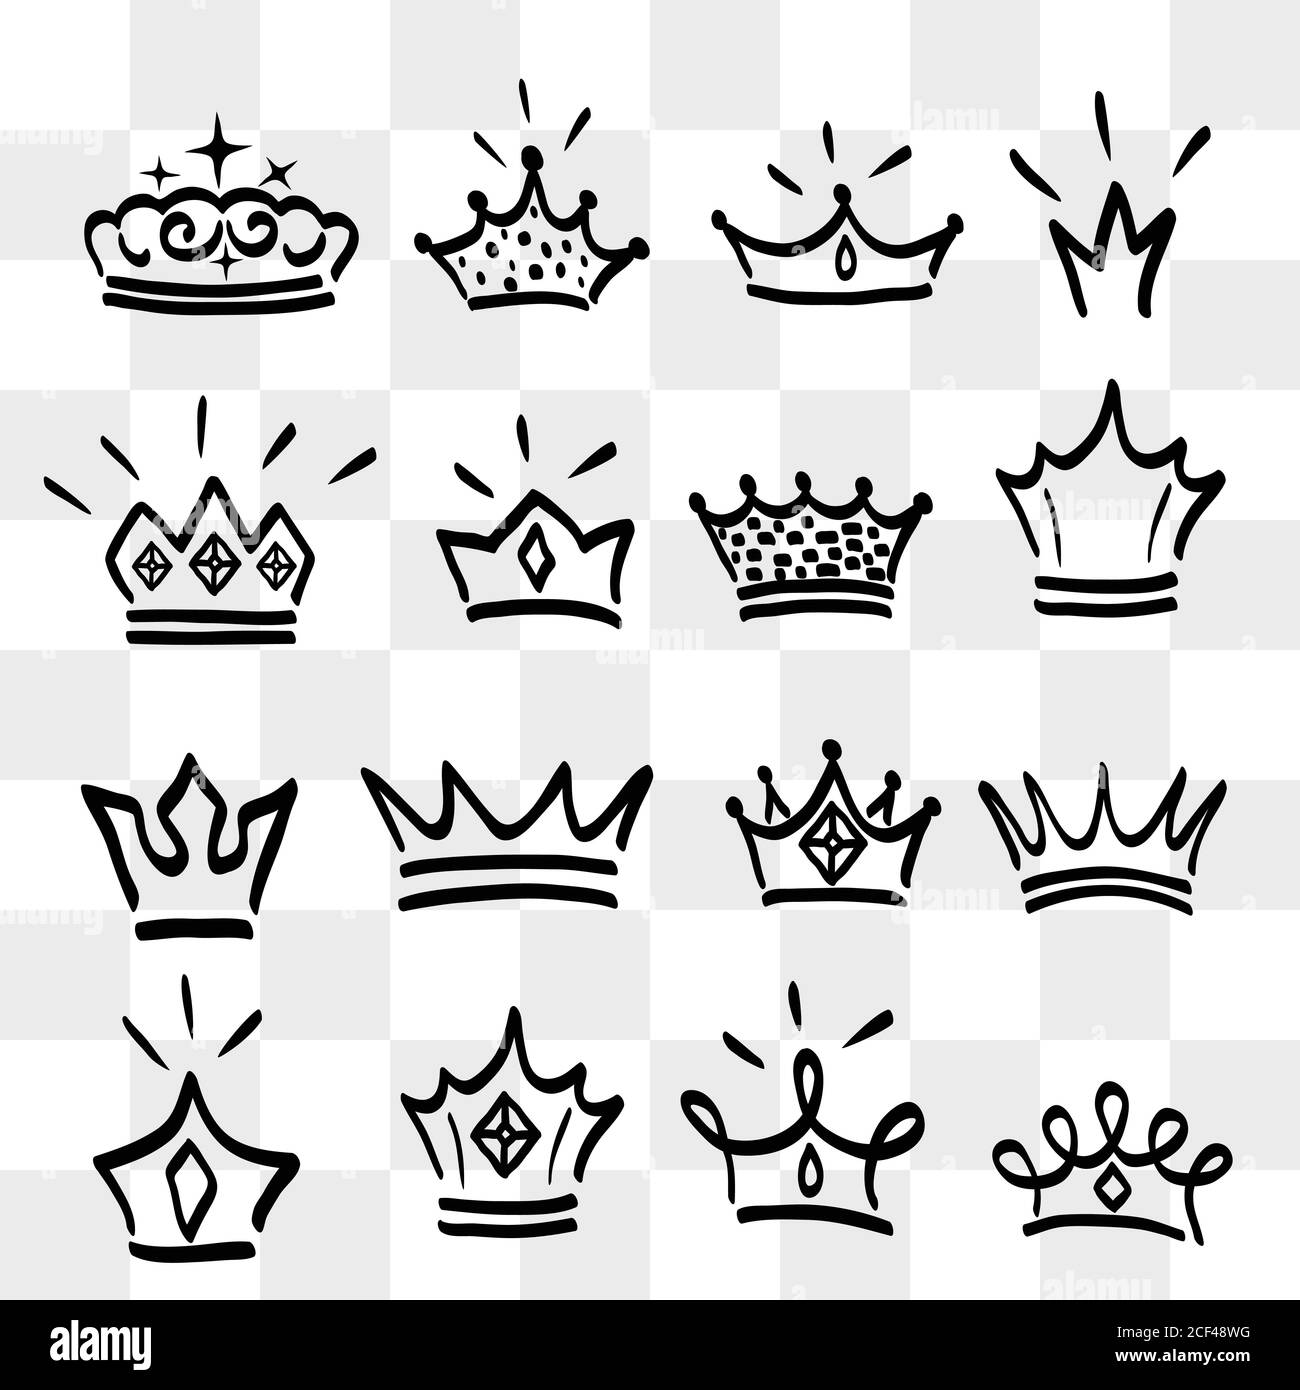 Crown logo graffiti hand drawn icon. Black elements isolated on white background. Hand drawn set of different crown and tiara for princess.Vector illu Stock Vector